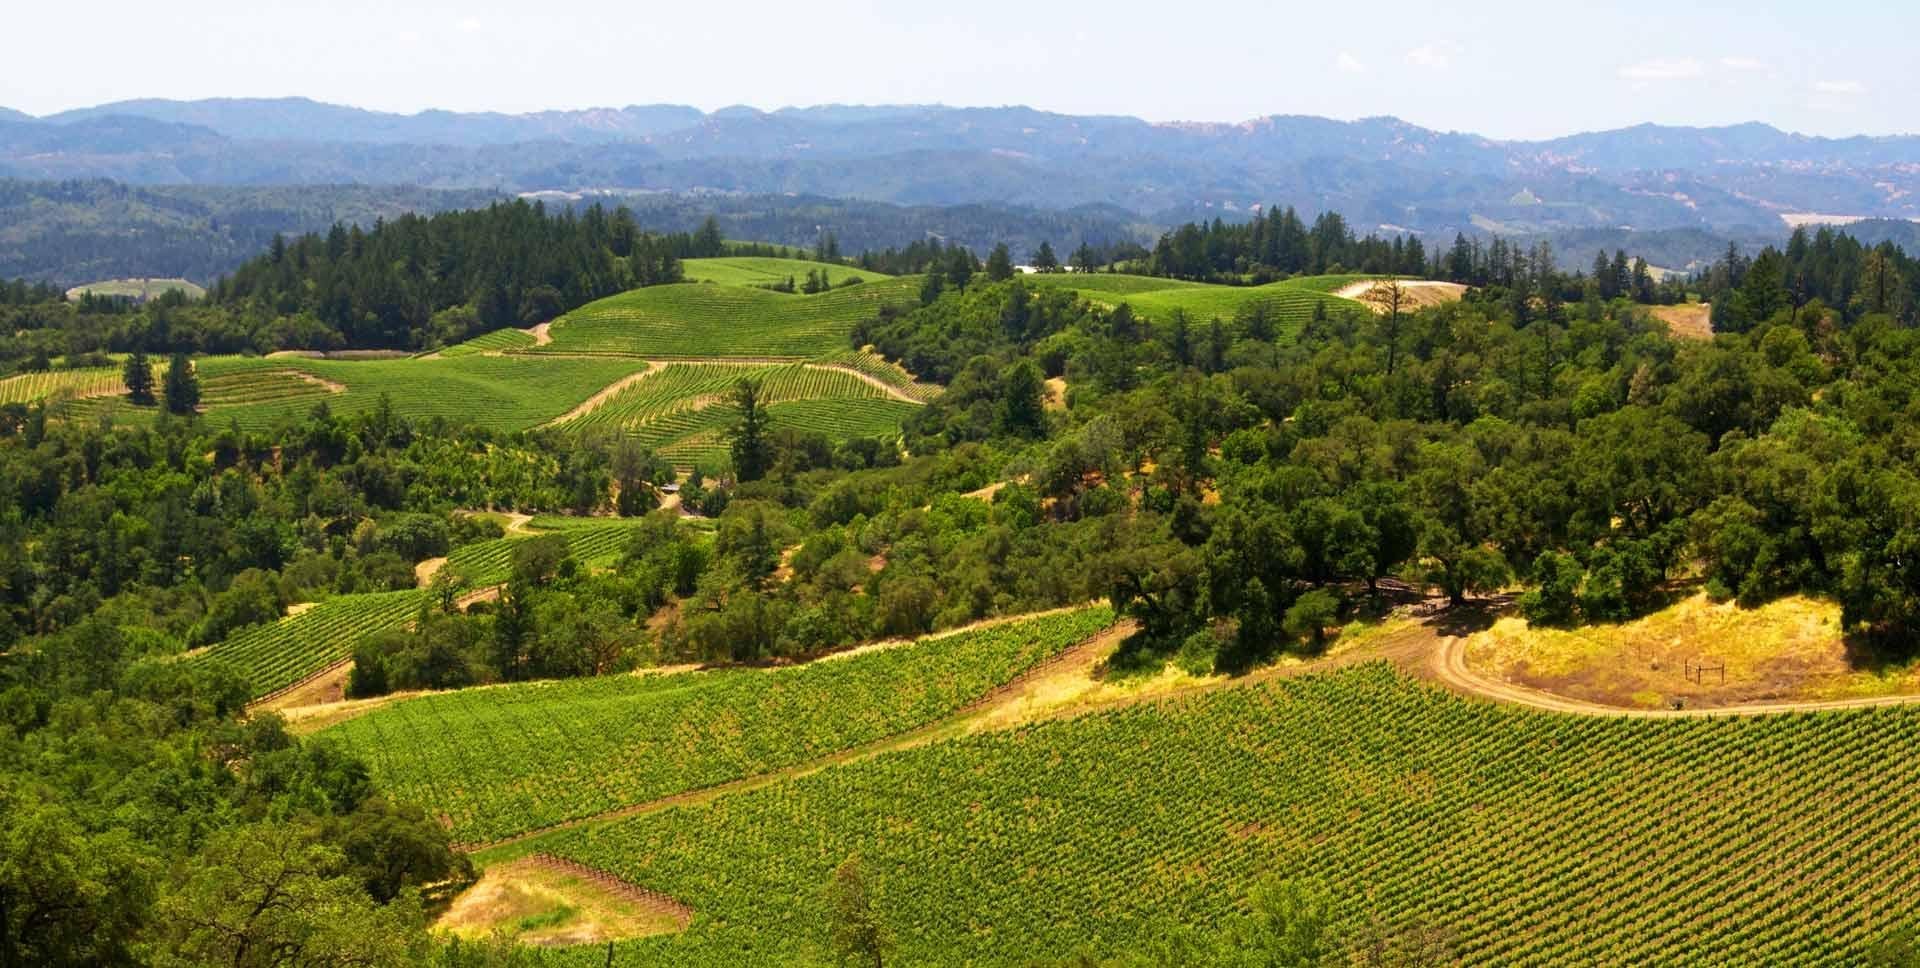 How To Plan A Trip To Sonoma Valley?